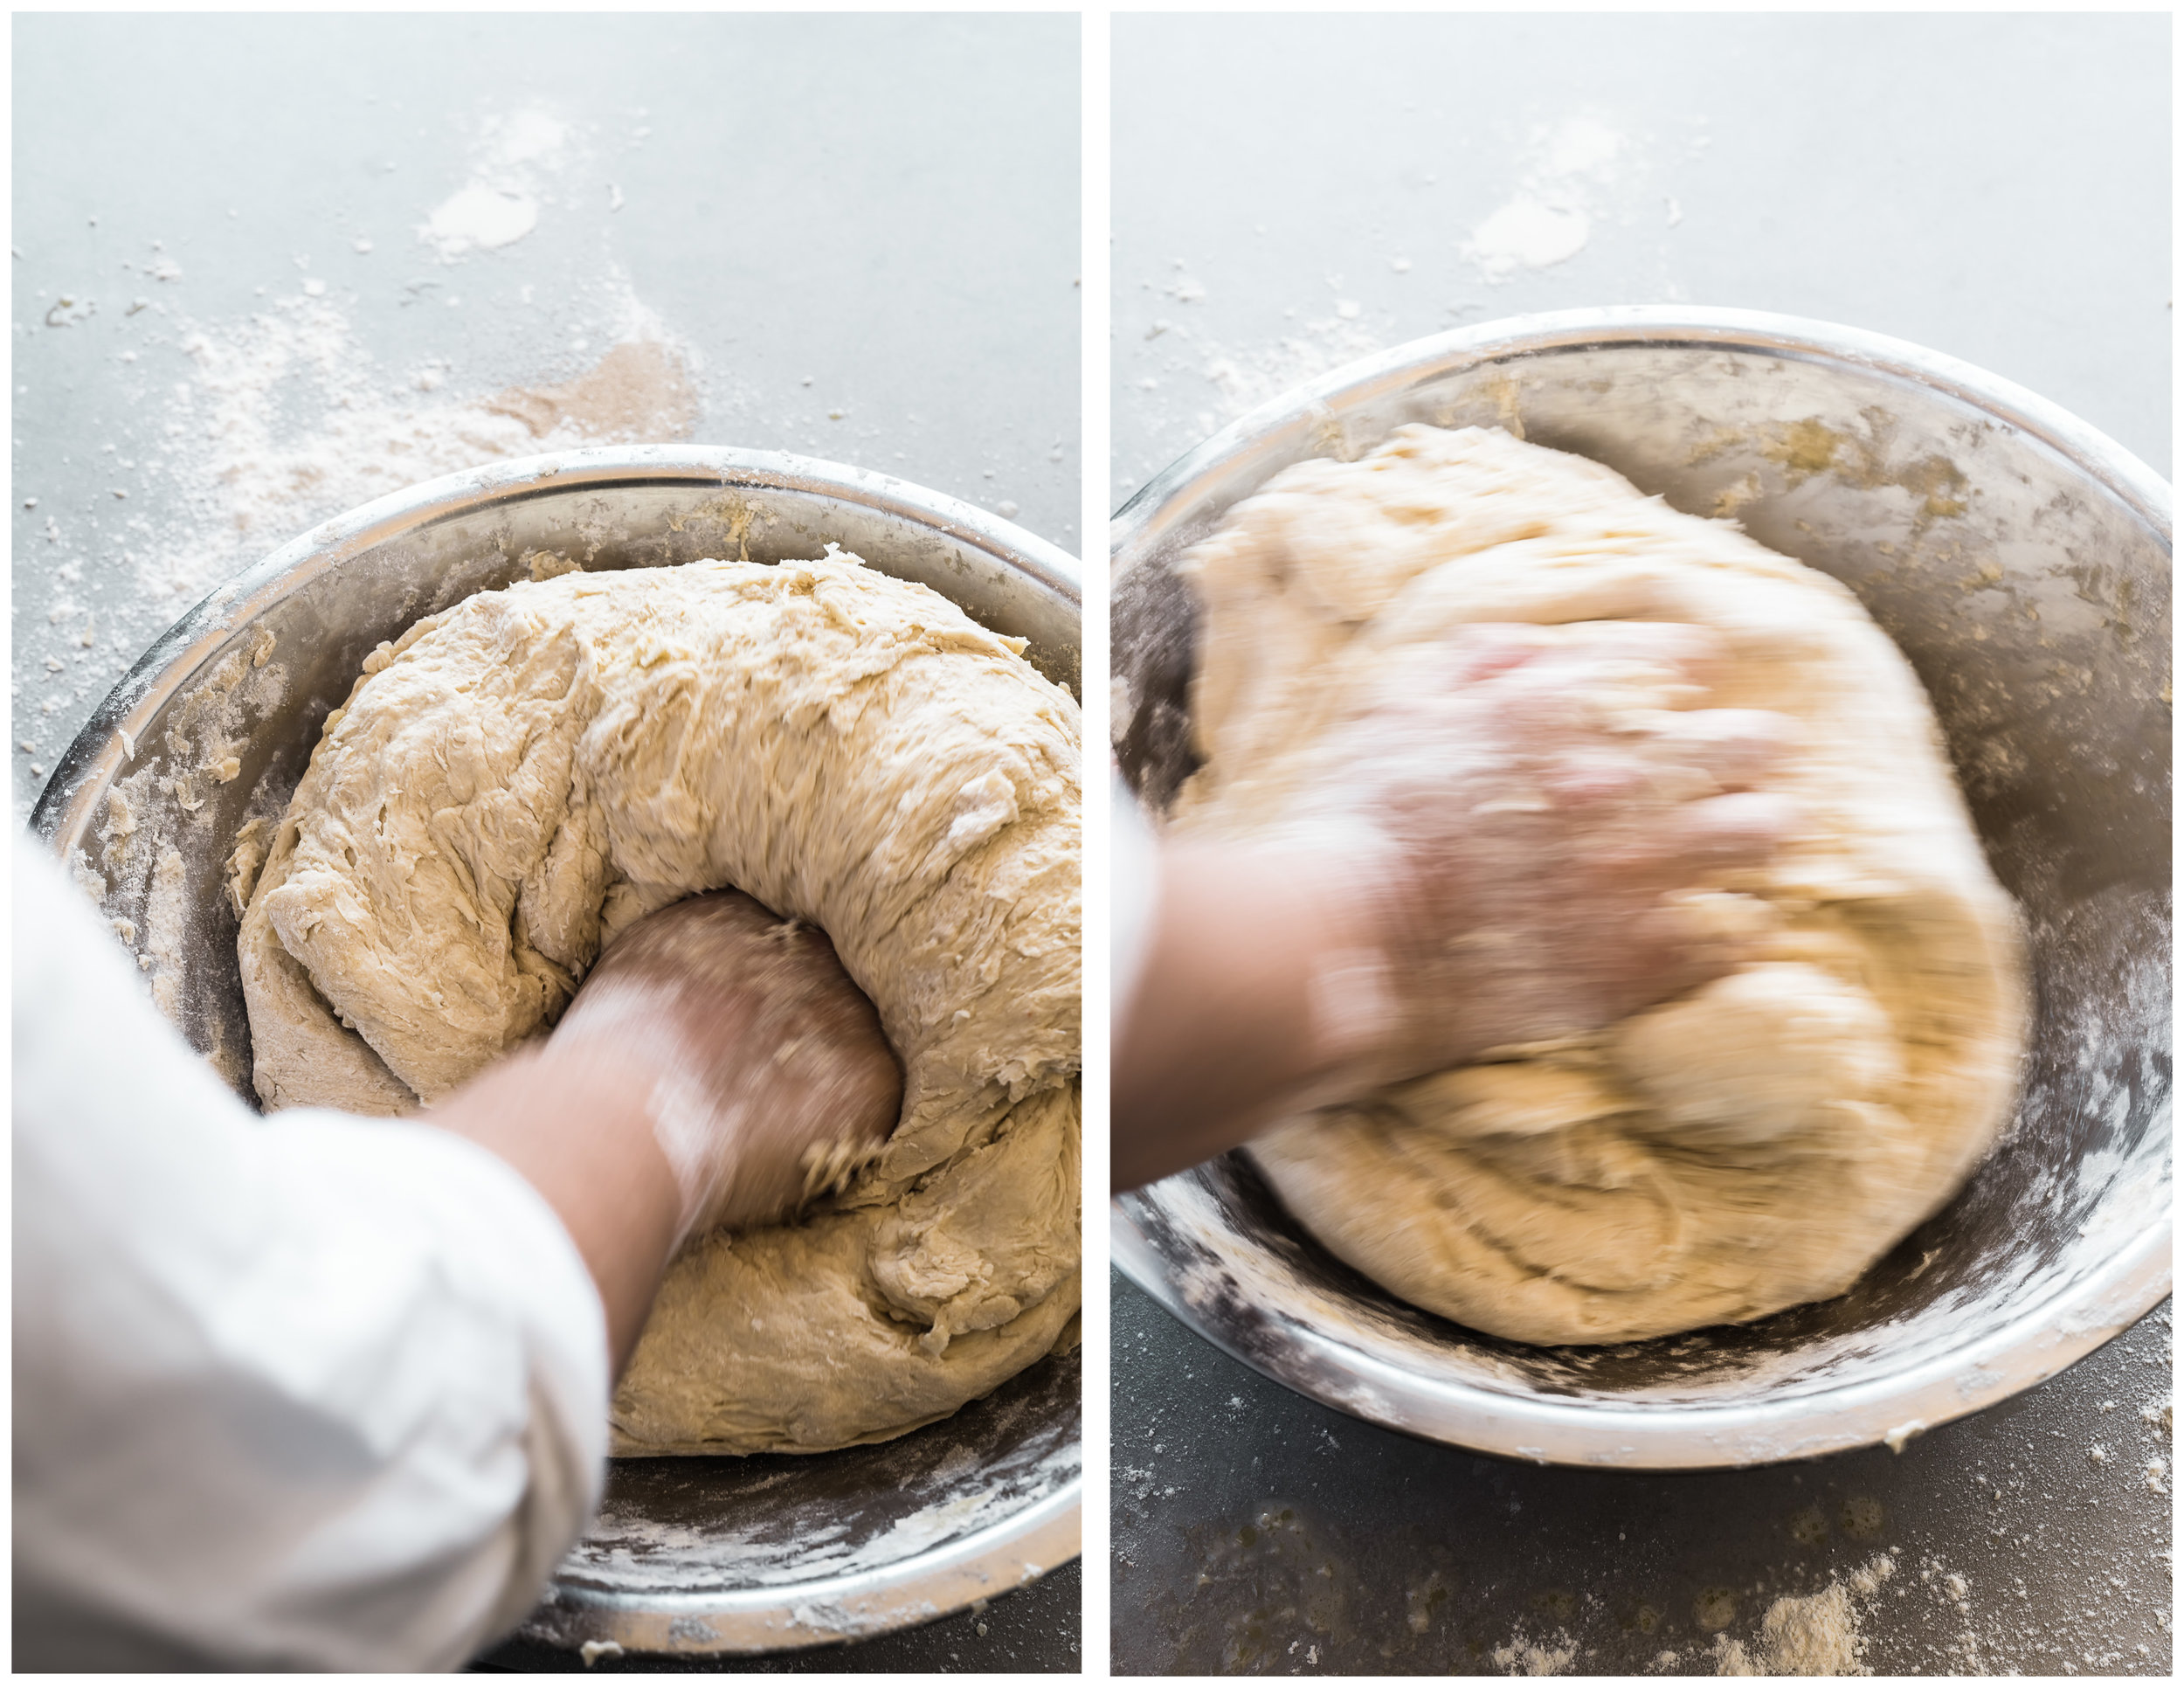 My Favorite Challah | Gather a Table